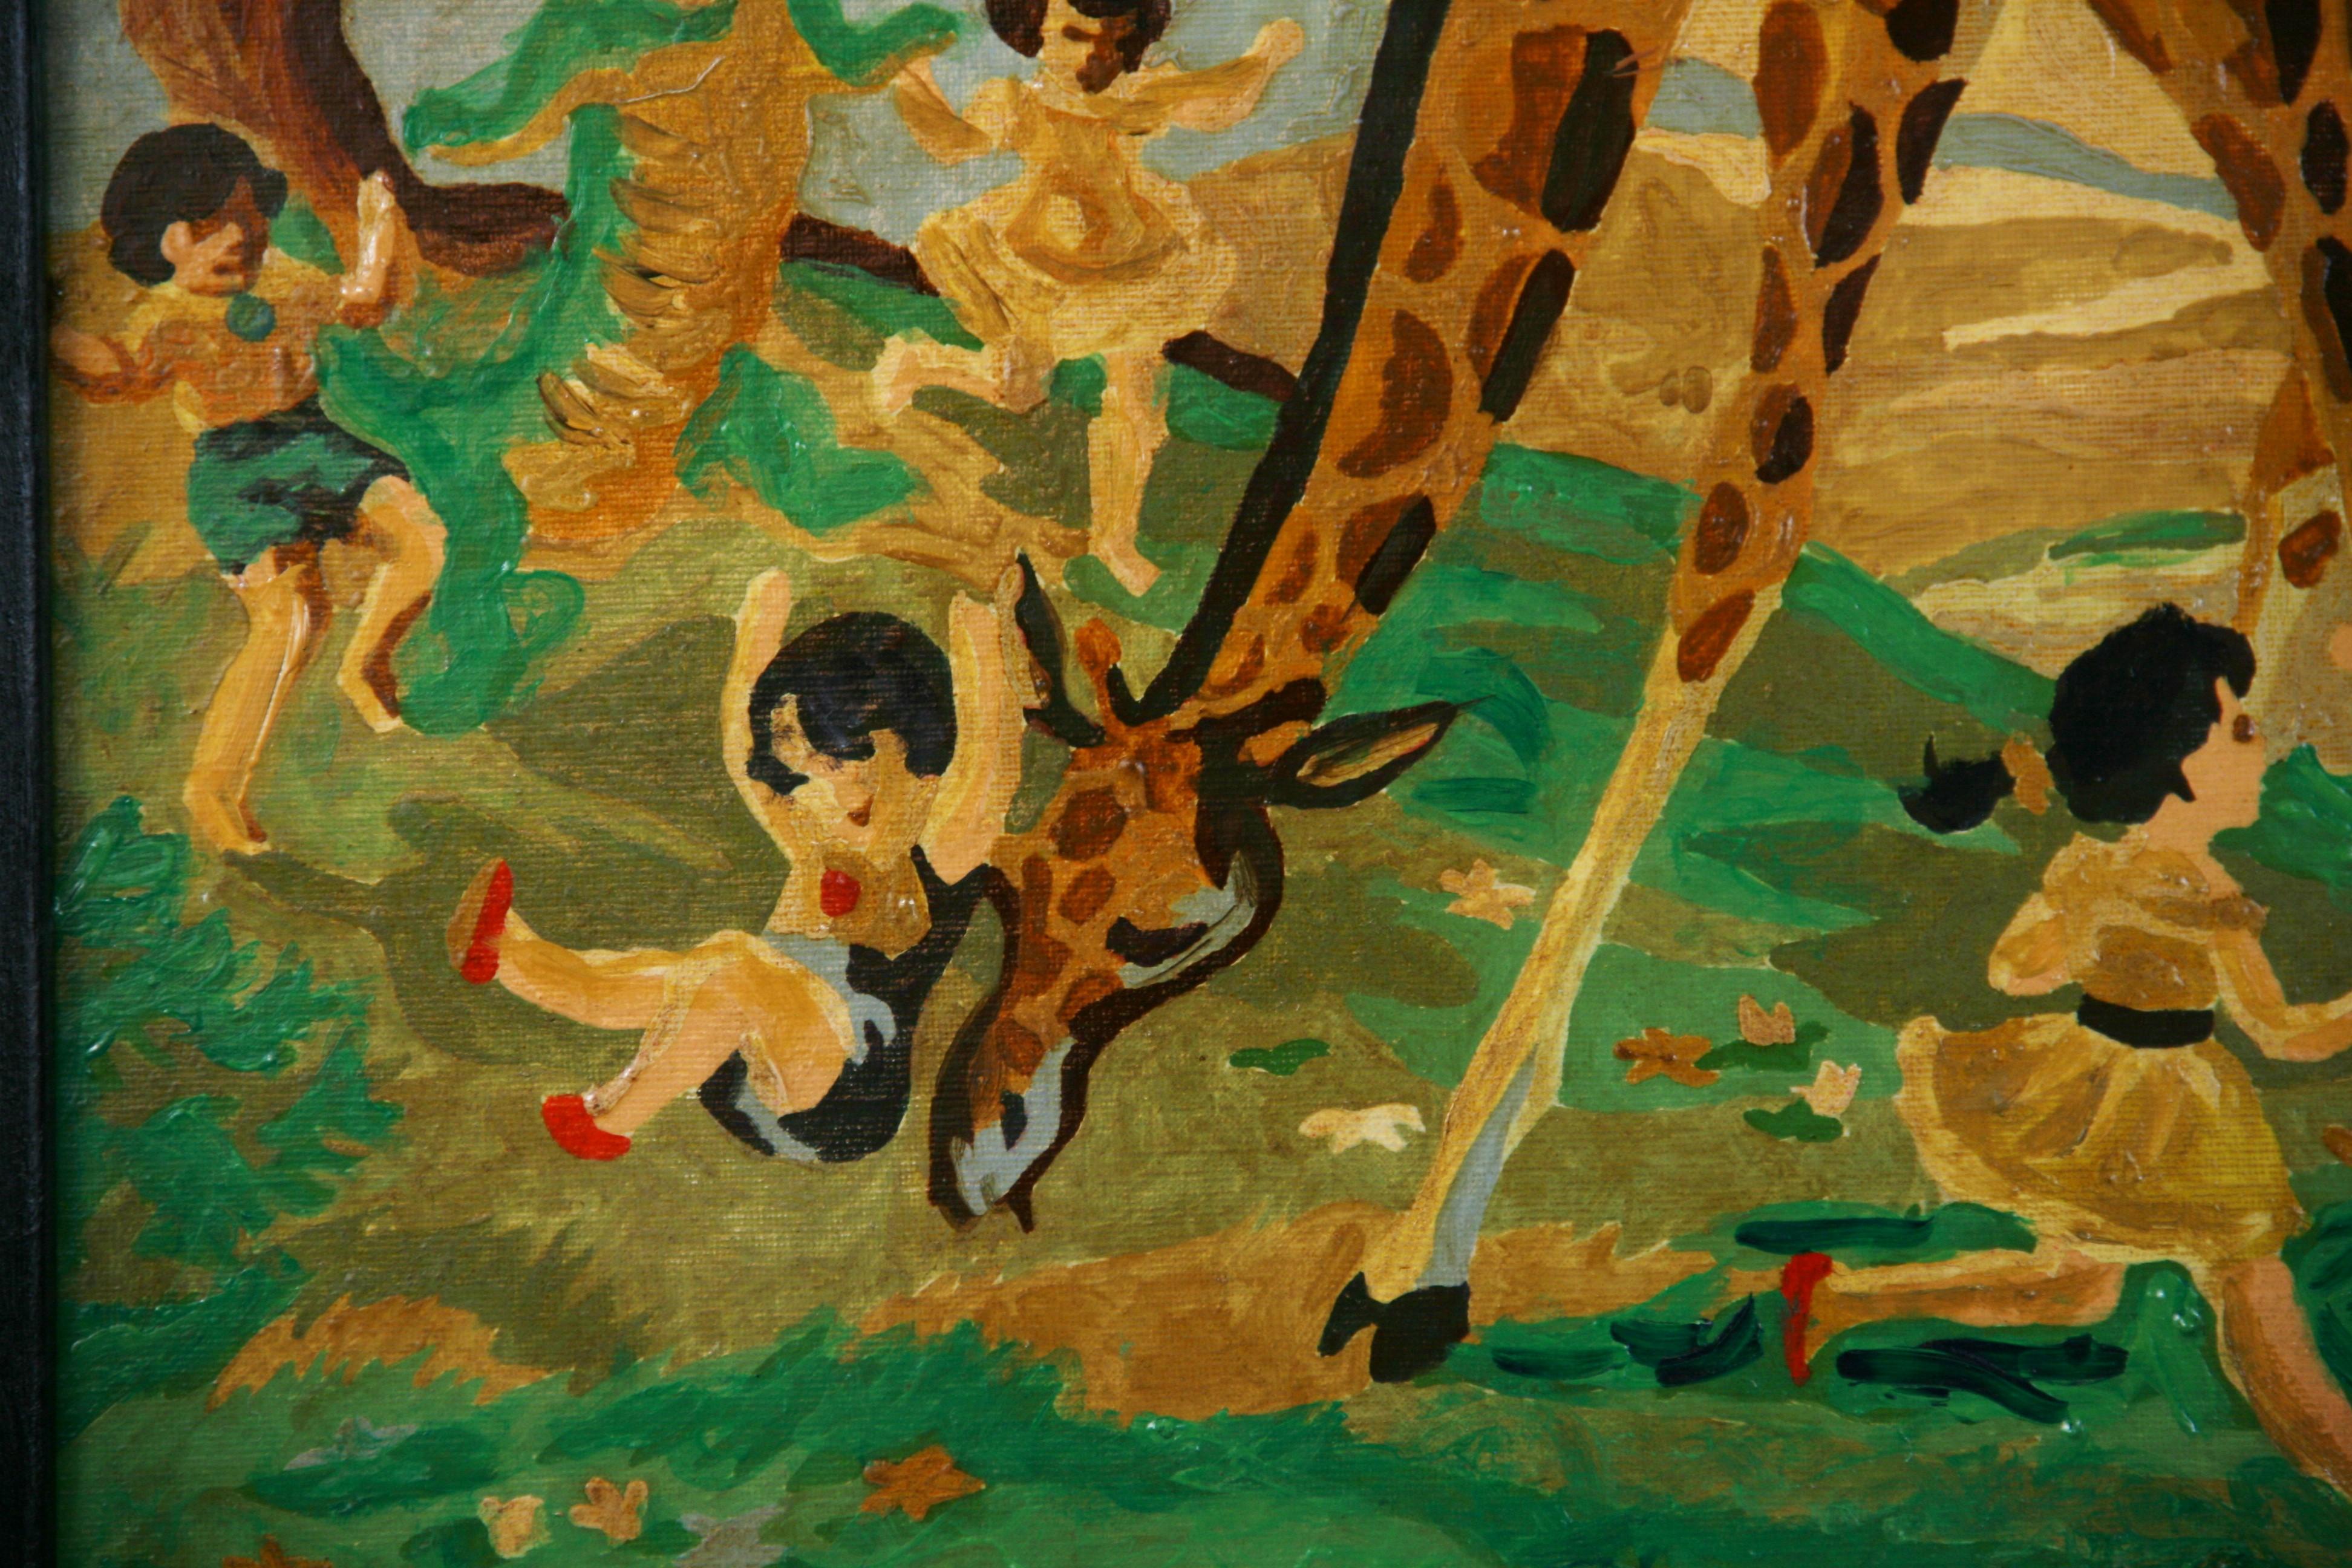 Riding a Giraffe Surreal  Oil Painting 1956 For Sale 3